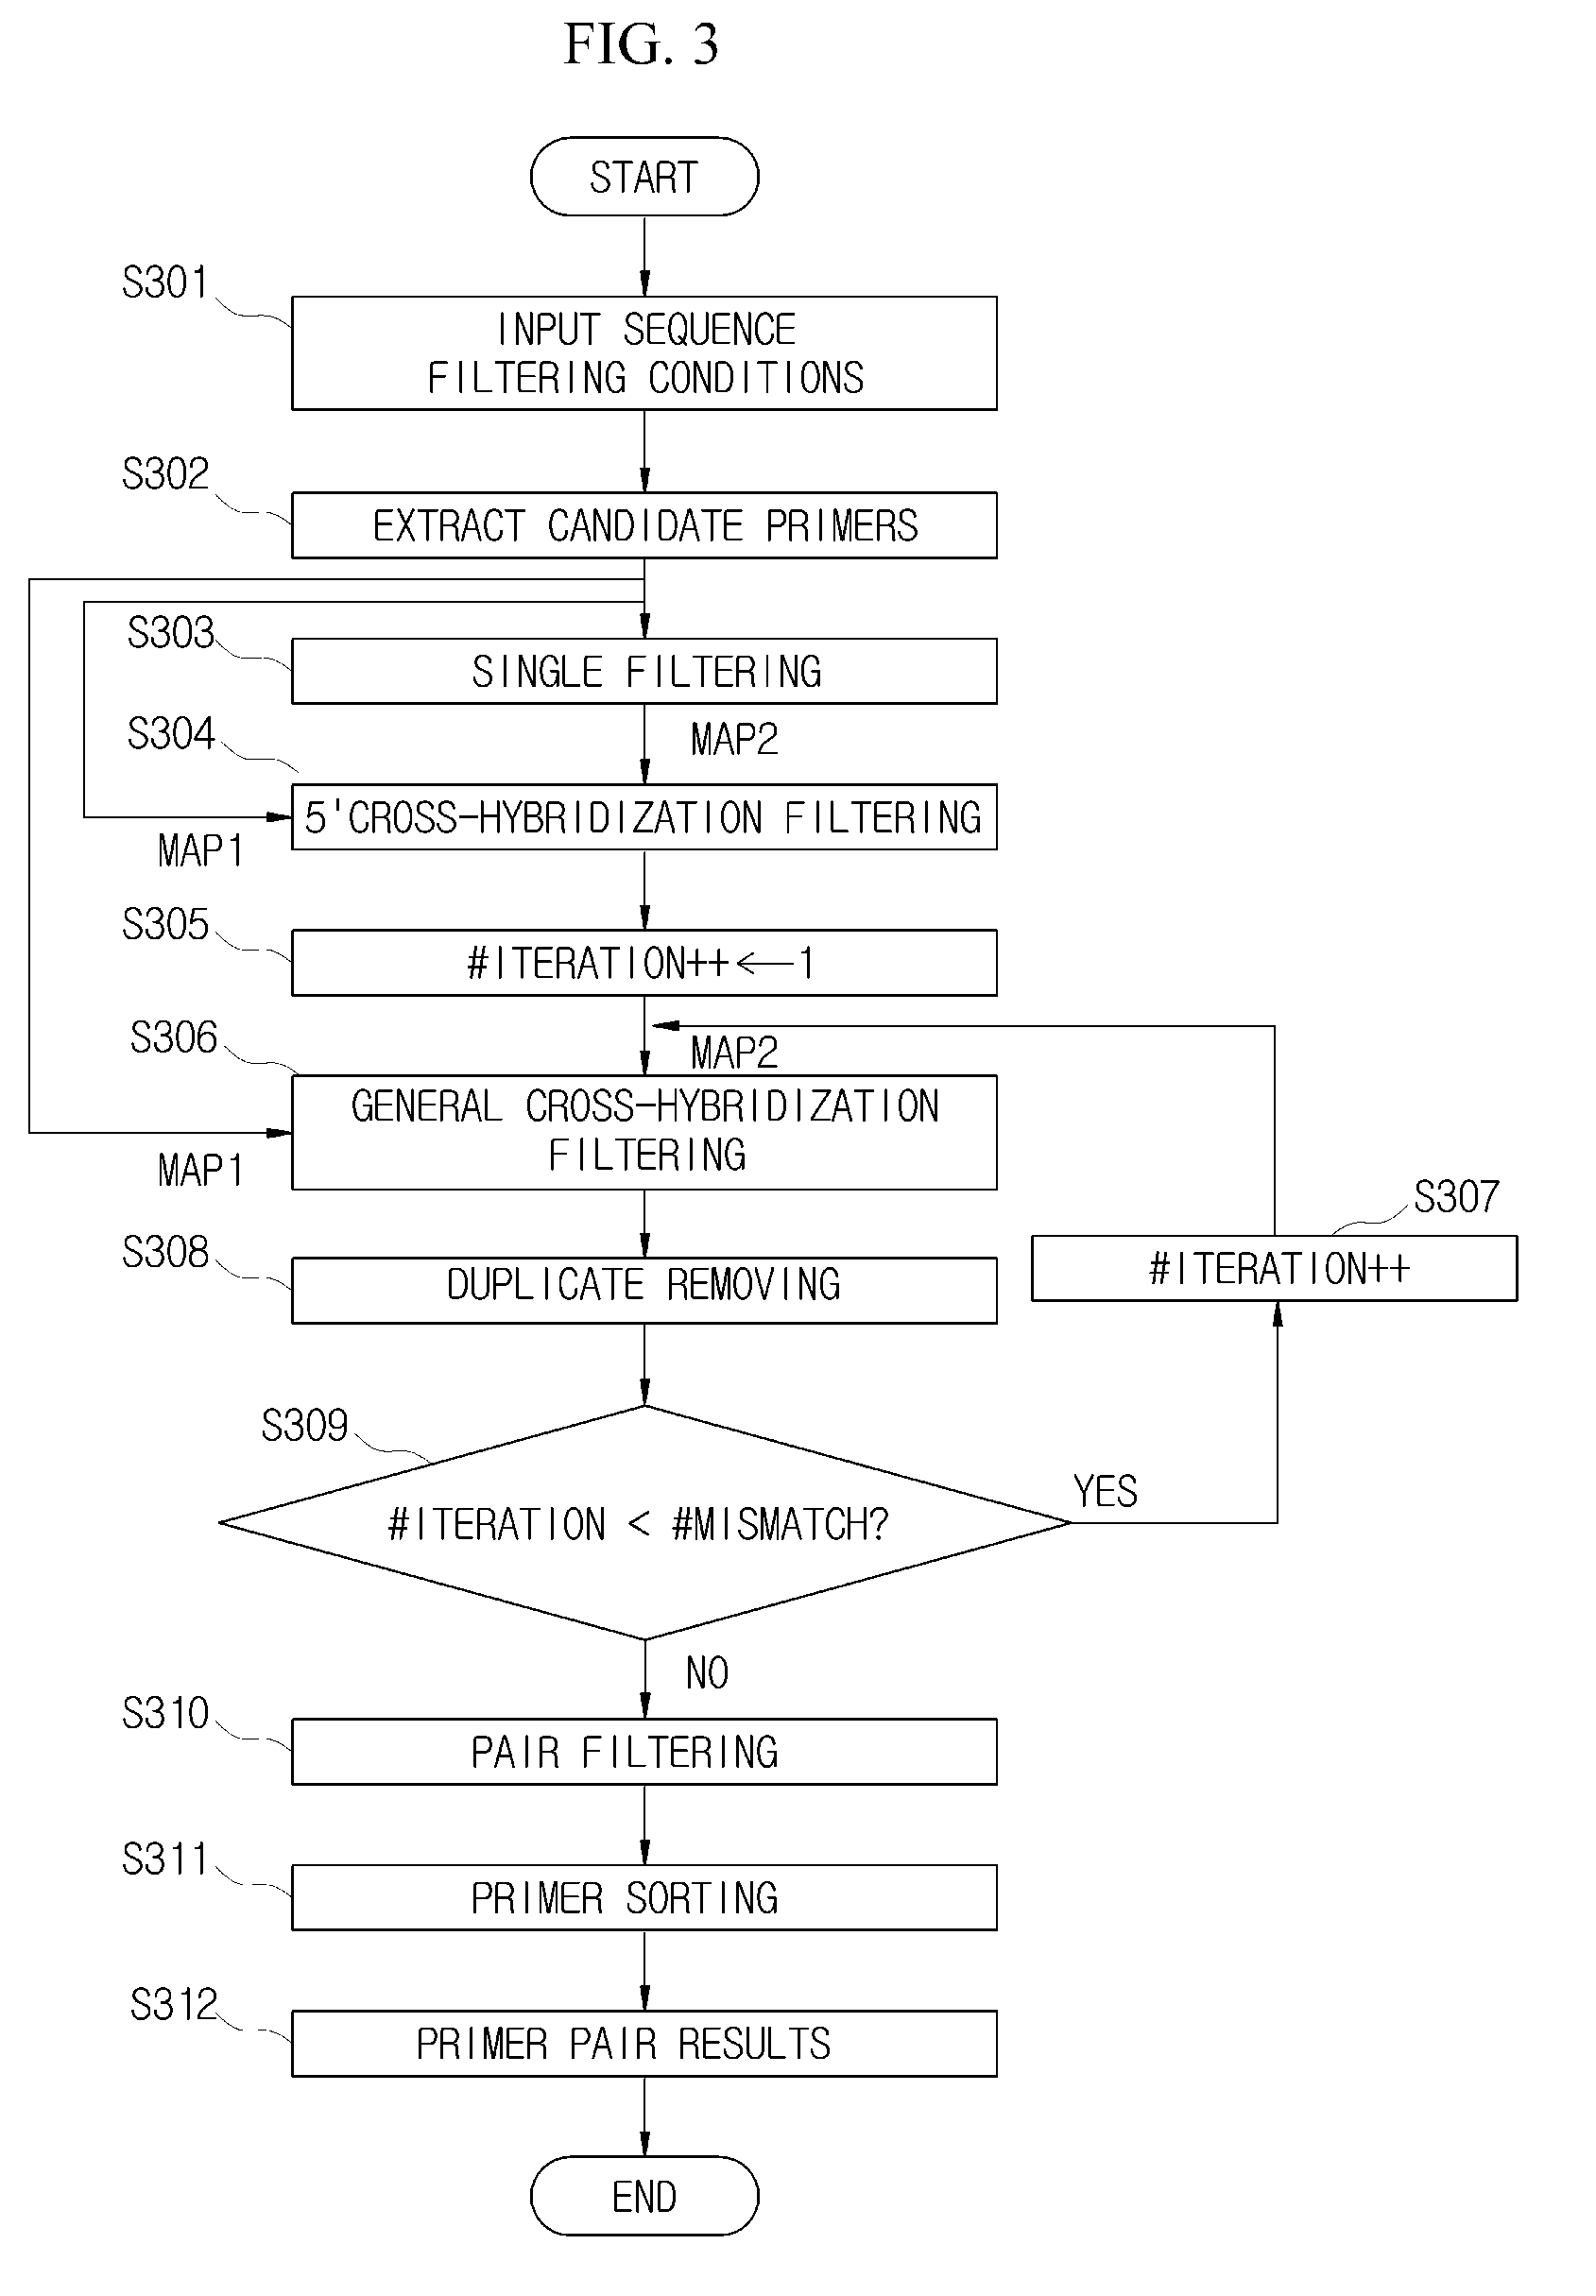 Method for thoroughly designing valid and ranked primers for genome-scale DNA sequence database